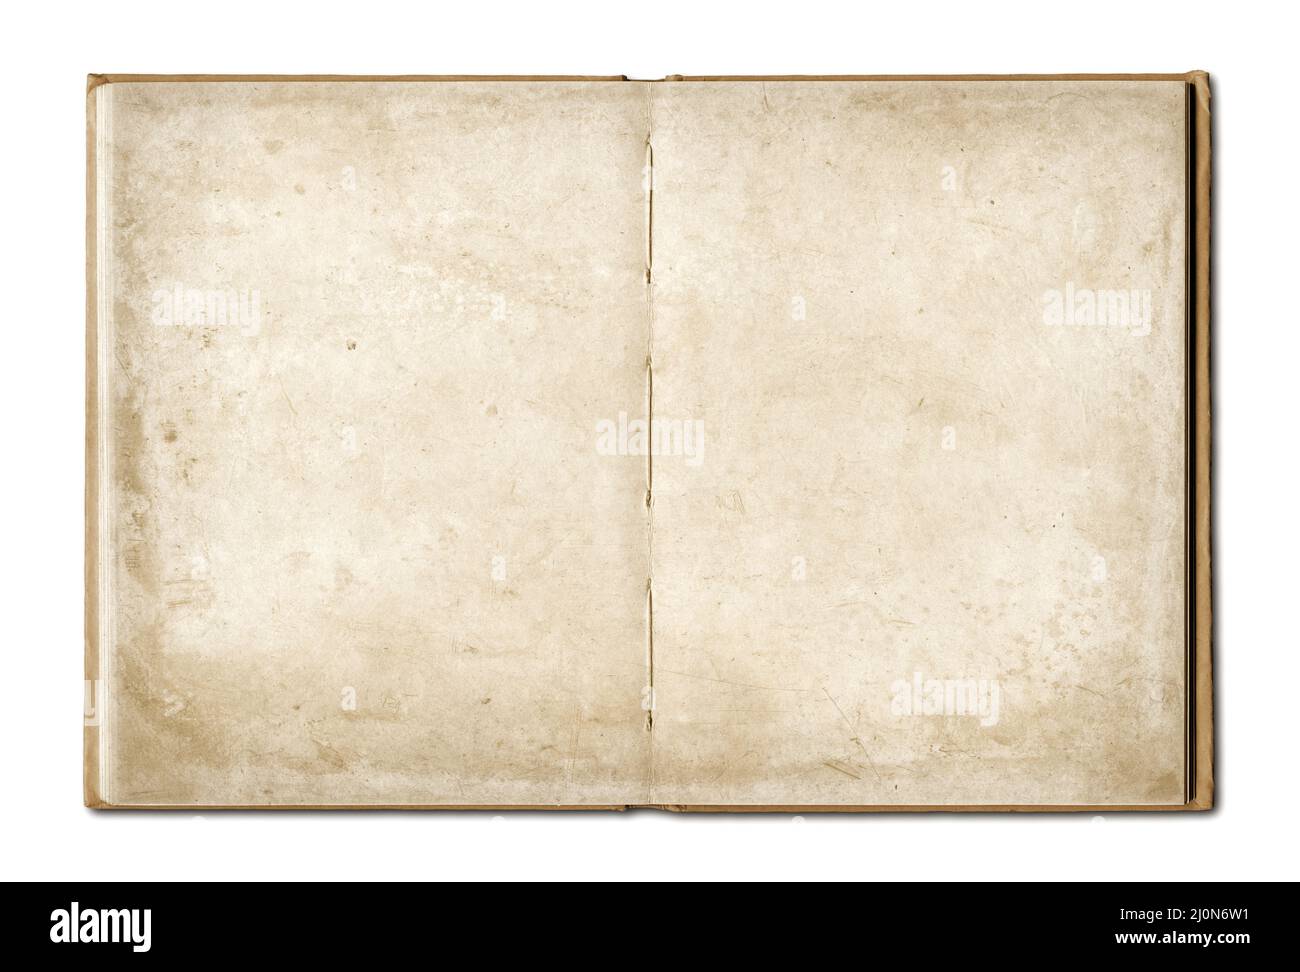 Old book with empty pages isolated Stock Photo by ©Viridana 8743081